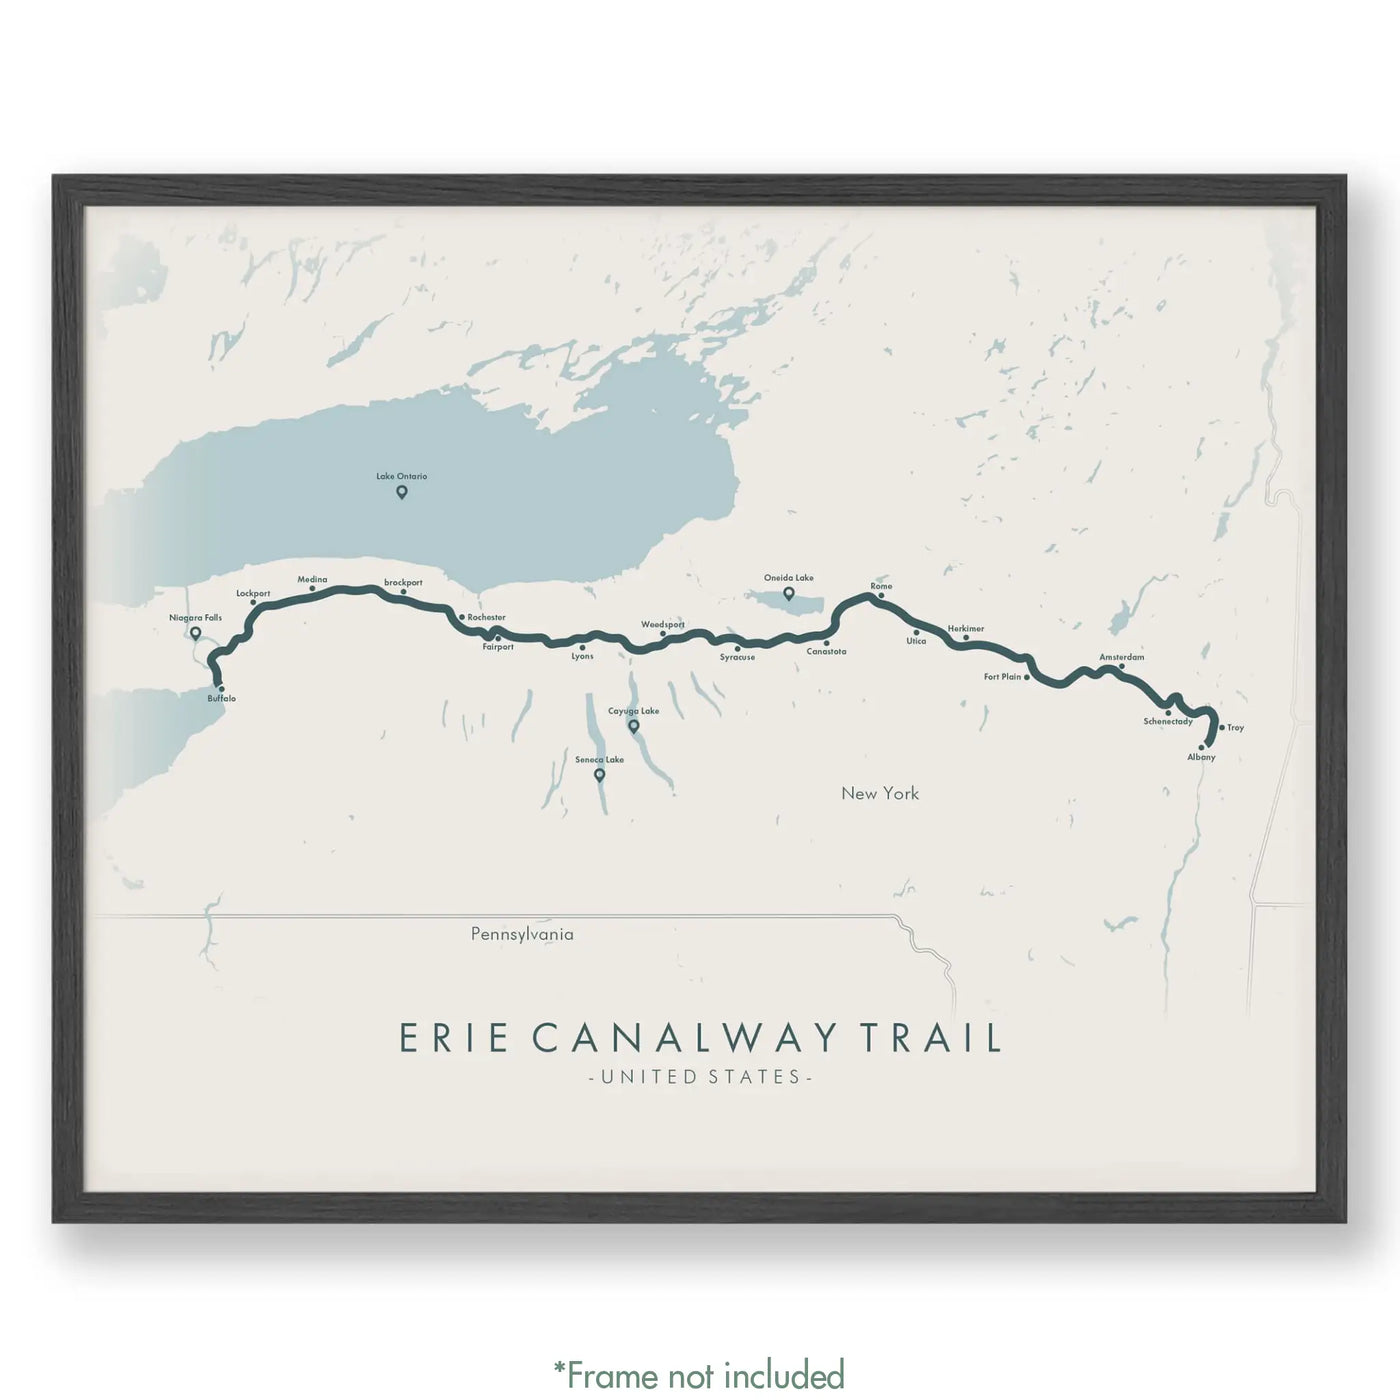 Trail Poster of Erie Canalway Trail - Beige